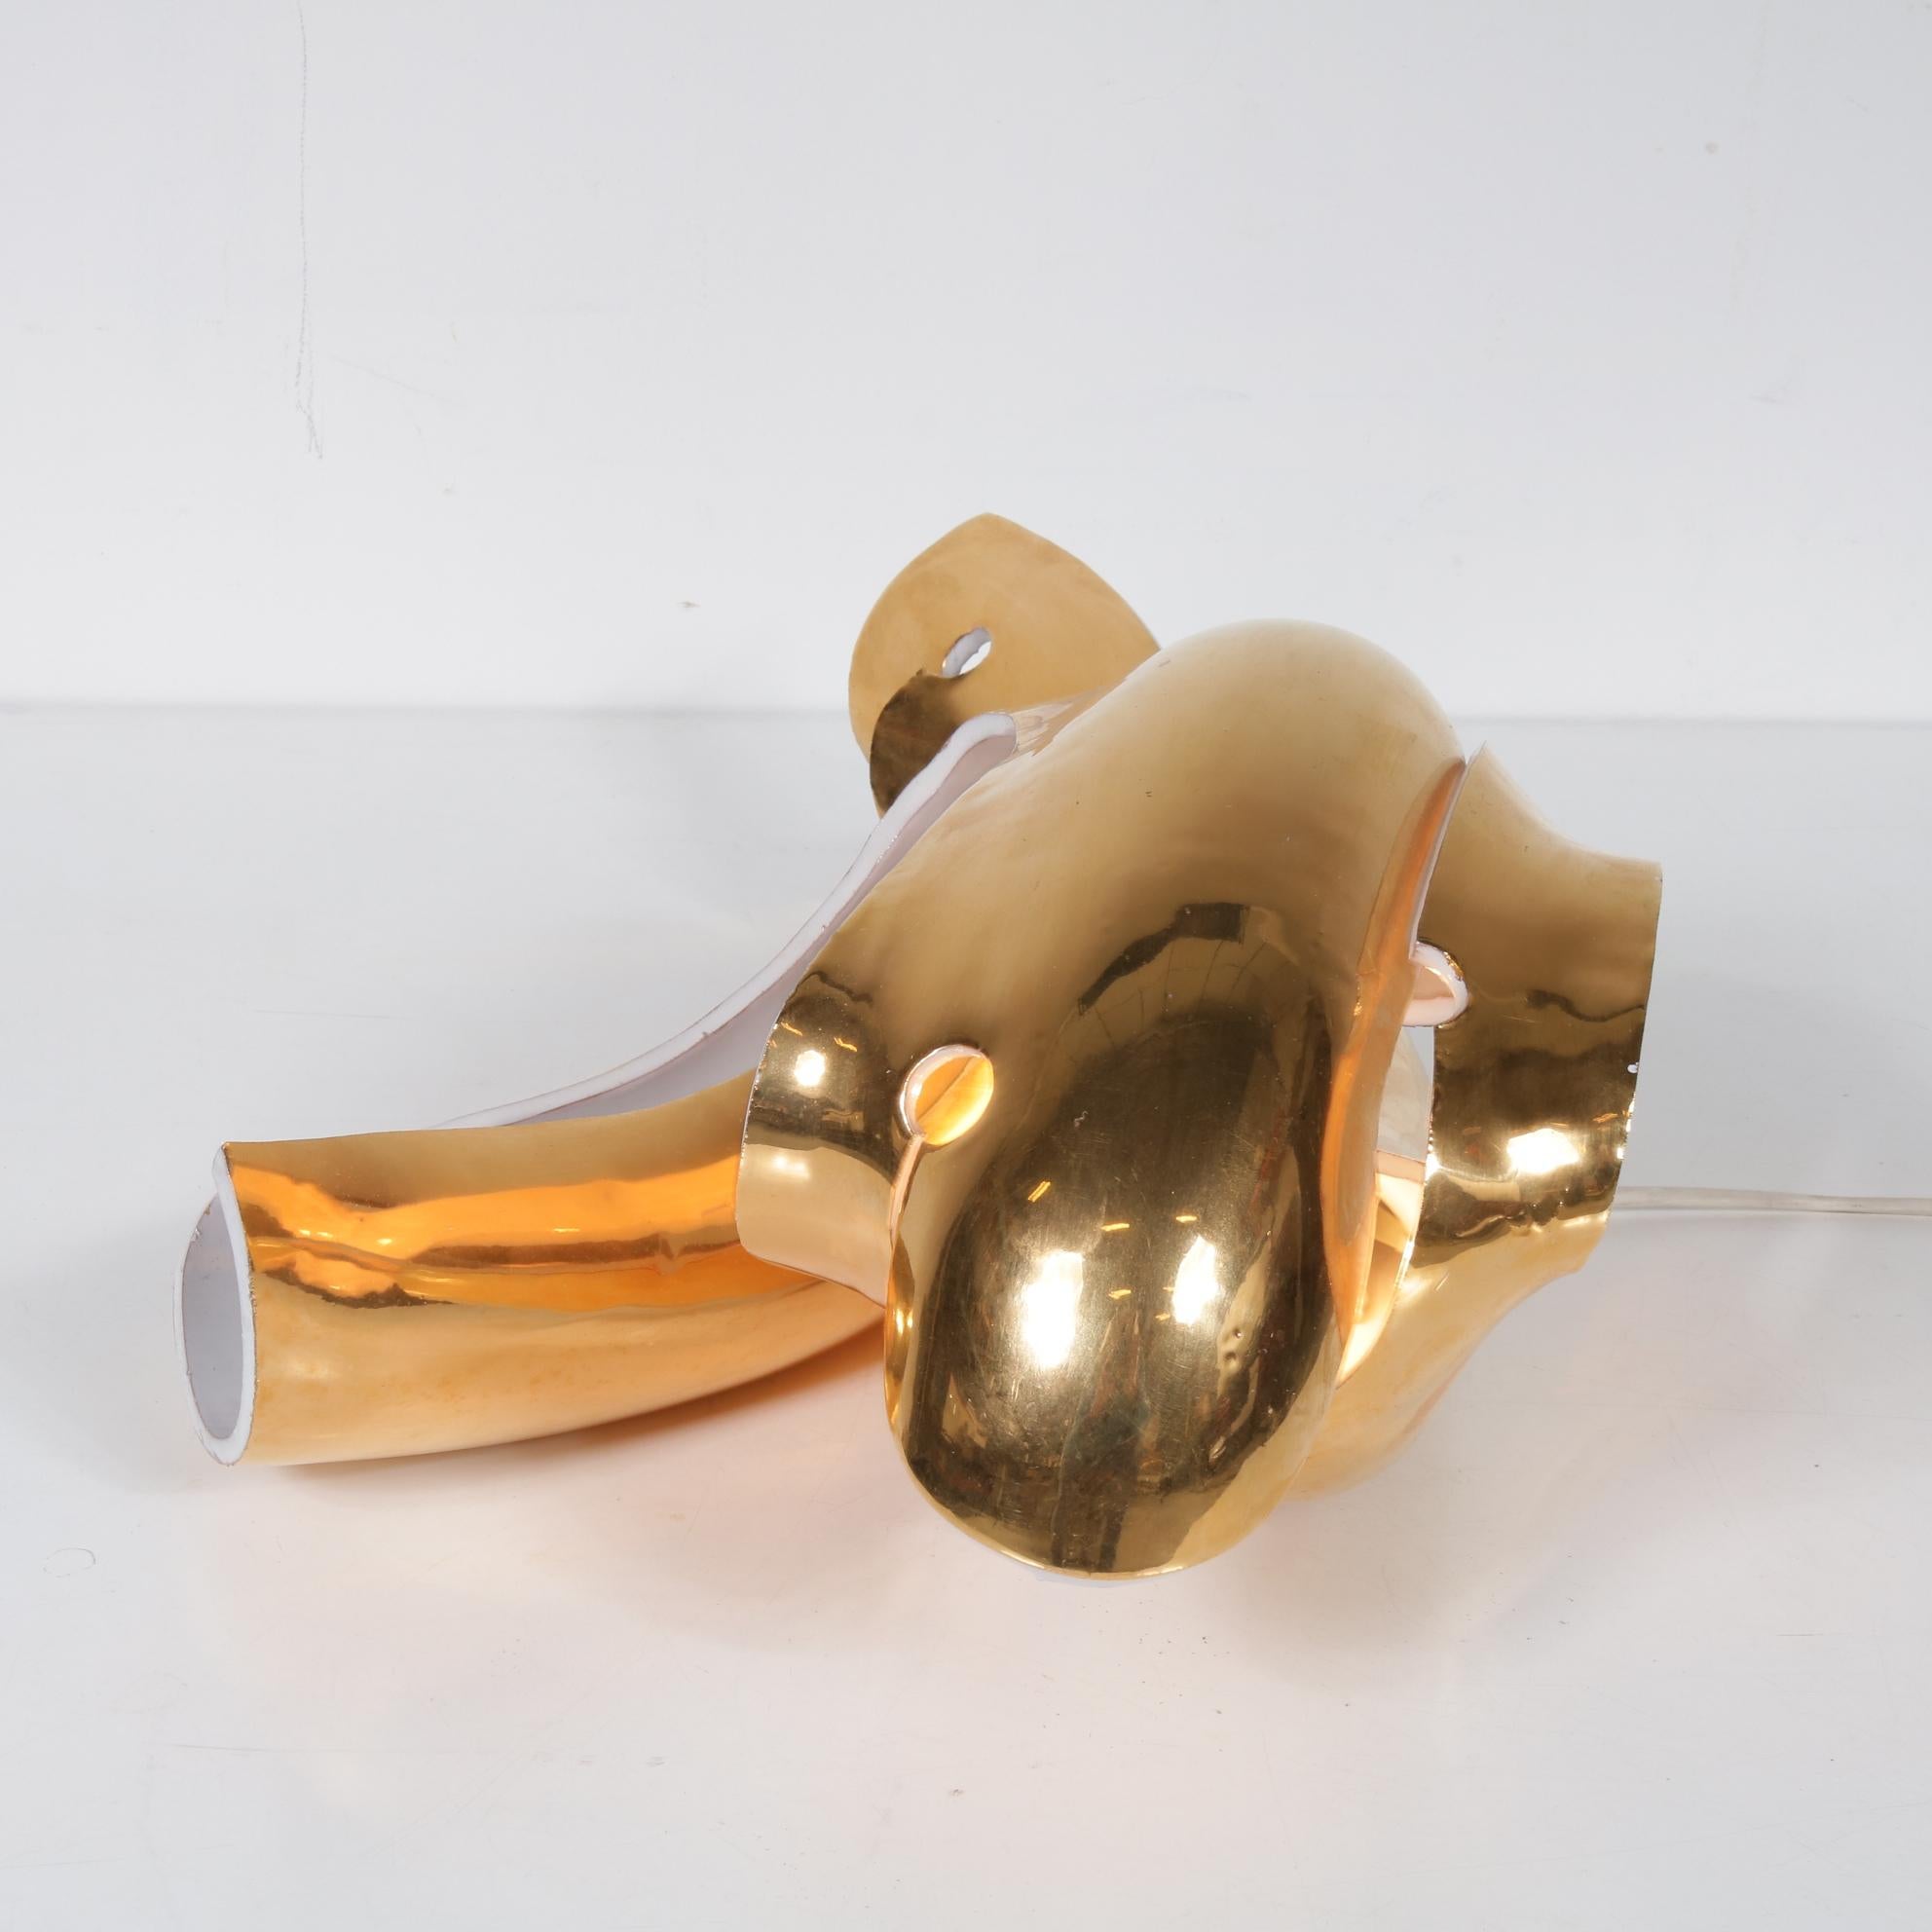 Italian Sculptural Table Light by Amadeo Fiorese for Cermiche Fiorese, Italy 1960 For Sale